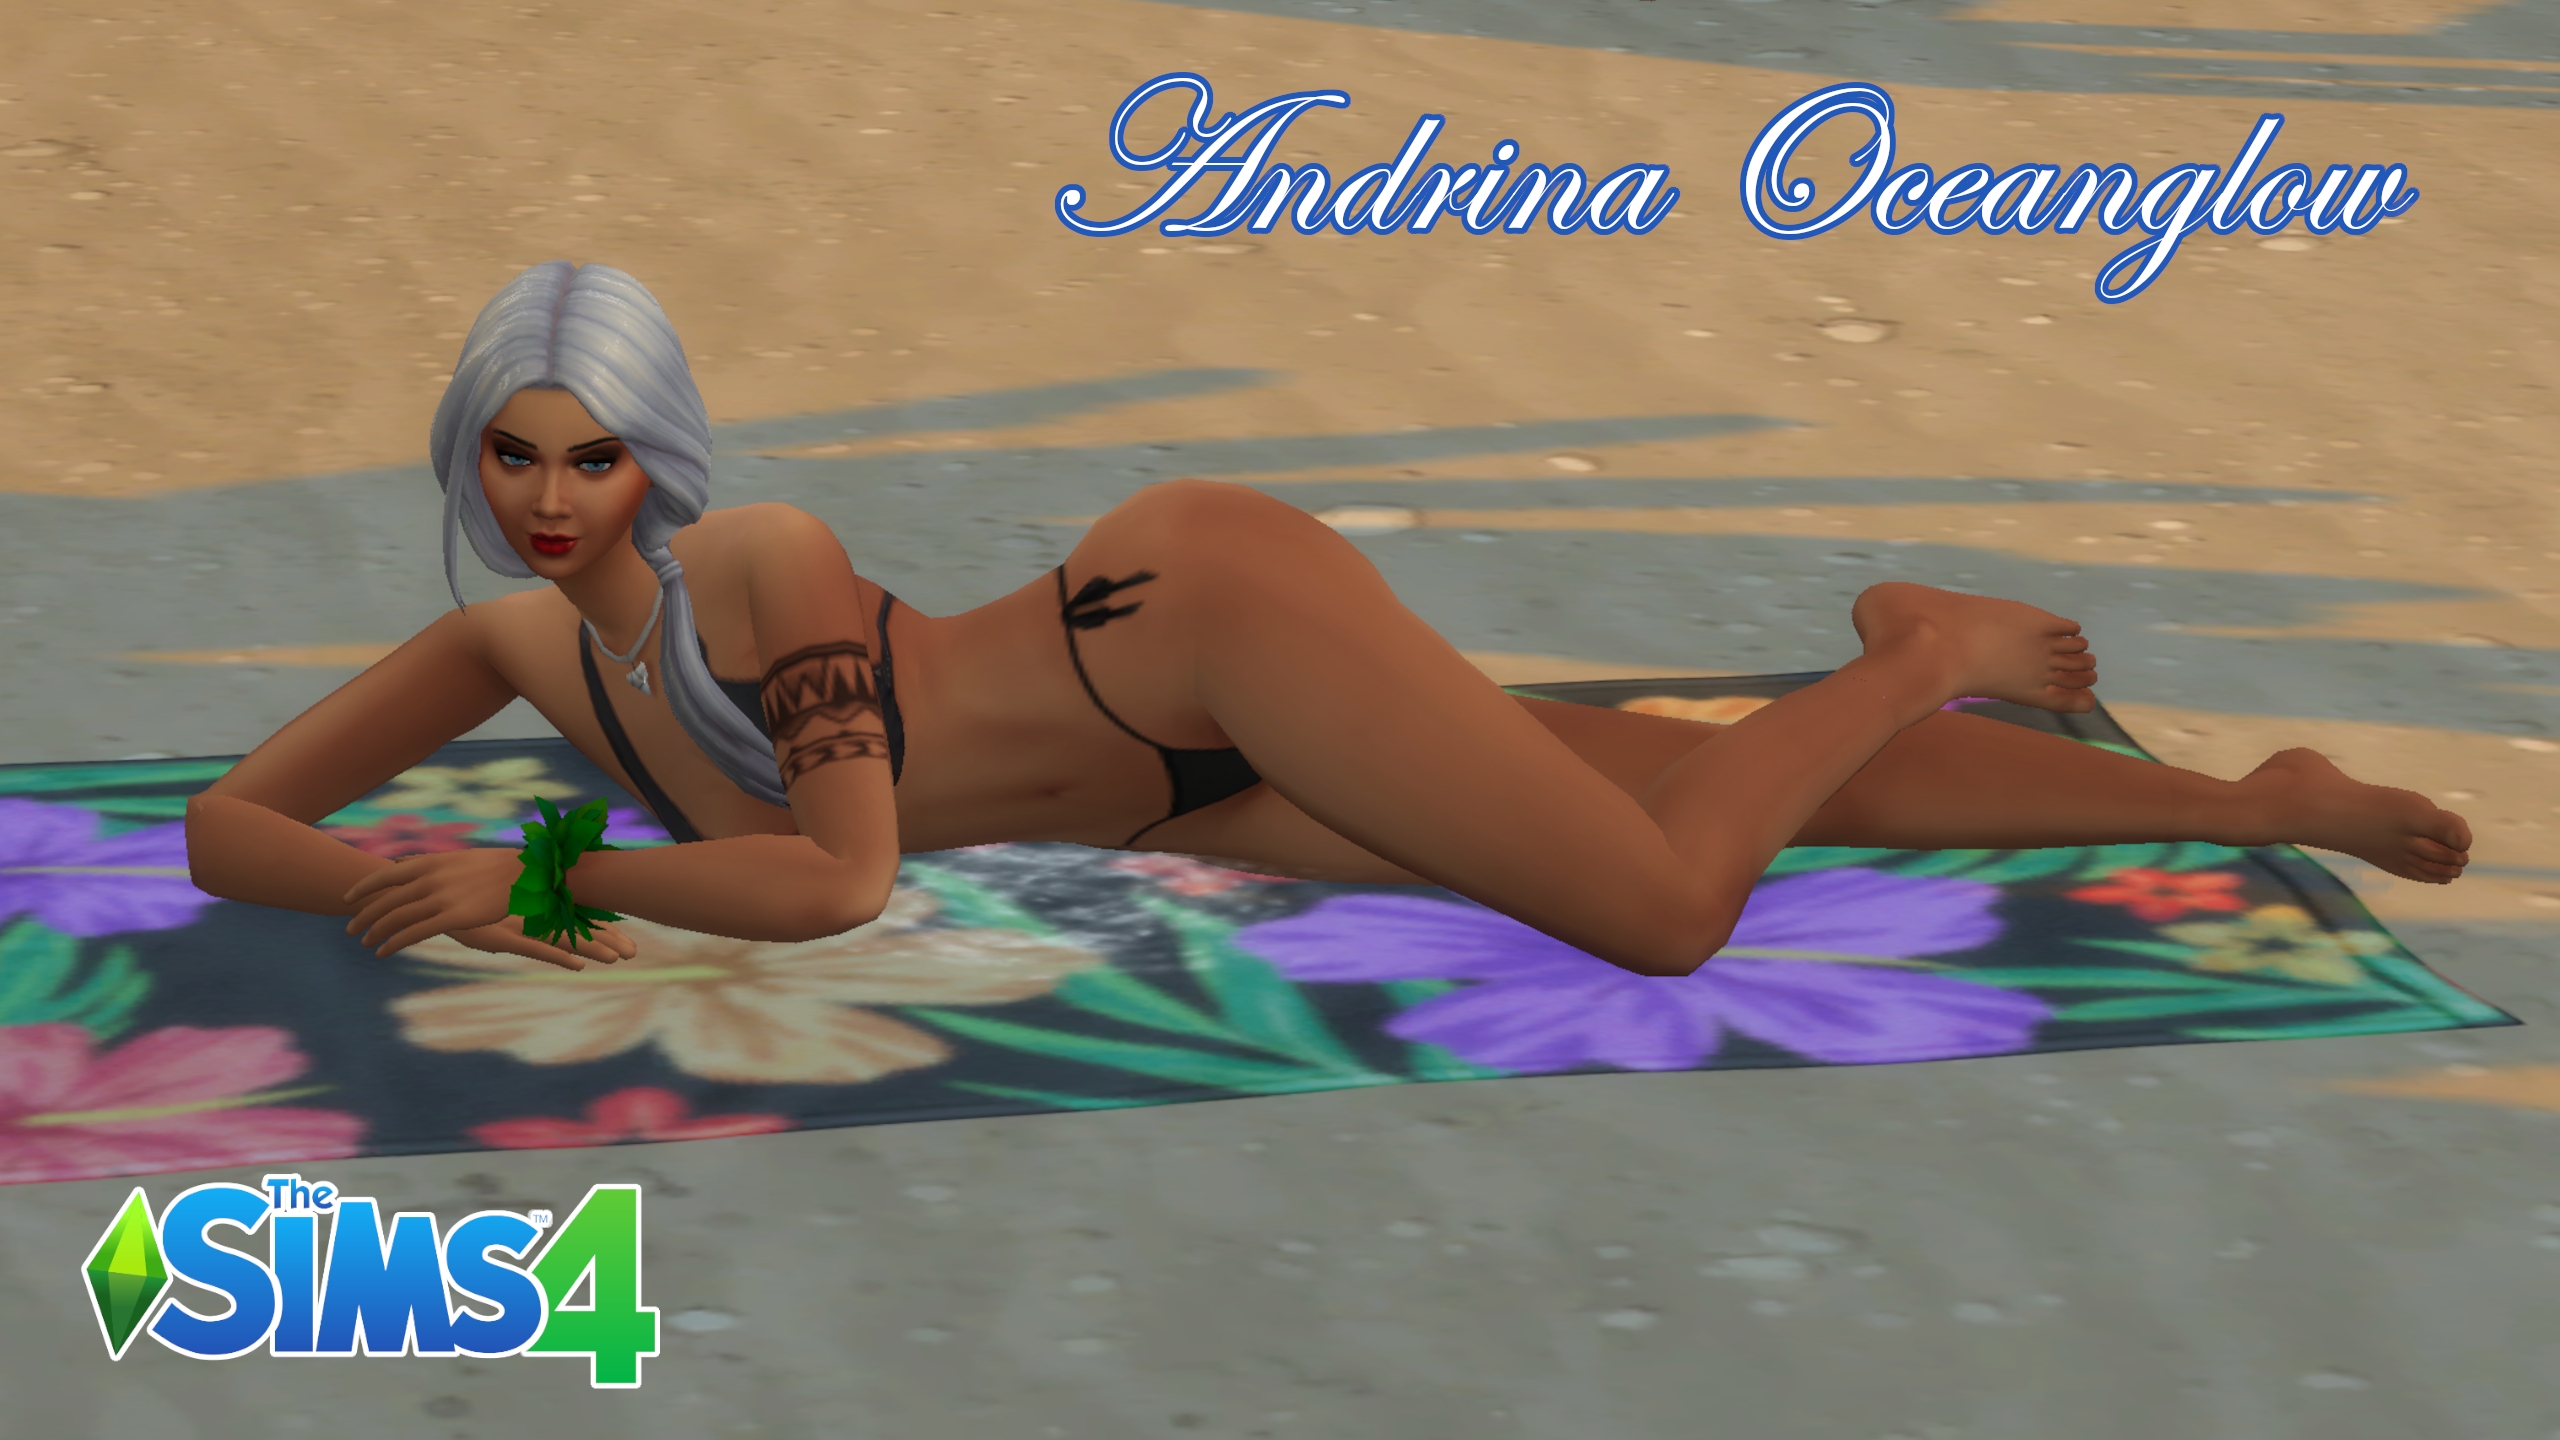 Sims 4 - Mermaid Andrina Oceanglow The Sims 4 Mermaid Siren White Hair Bustyfemale Thong Big Ass Toned Female Topless 4